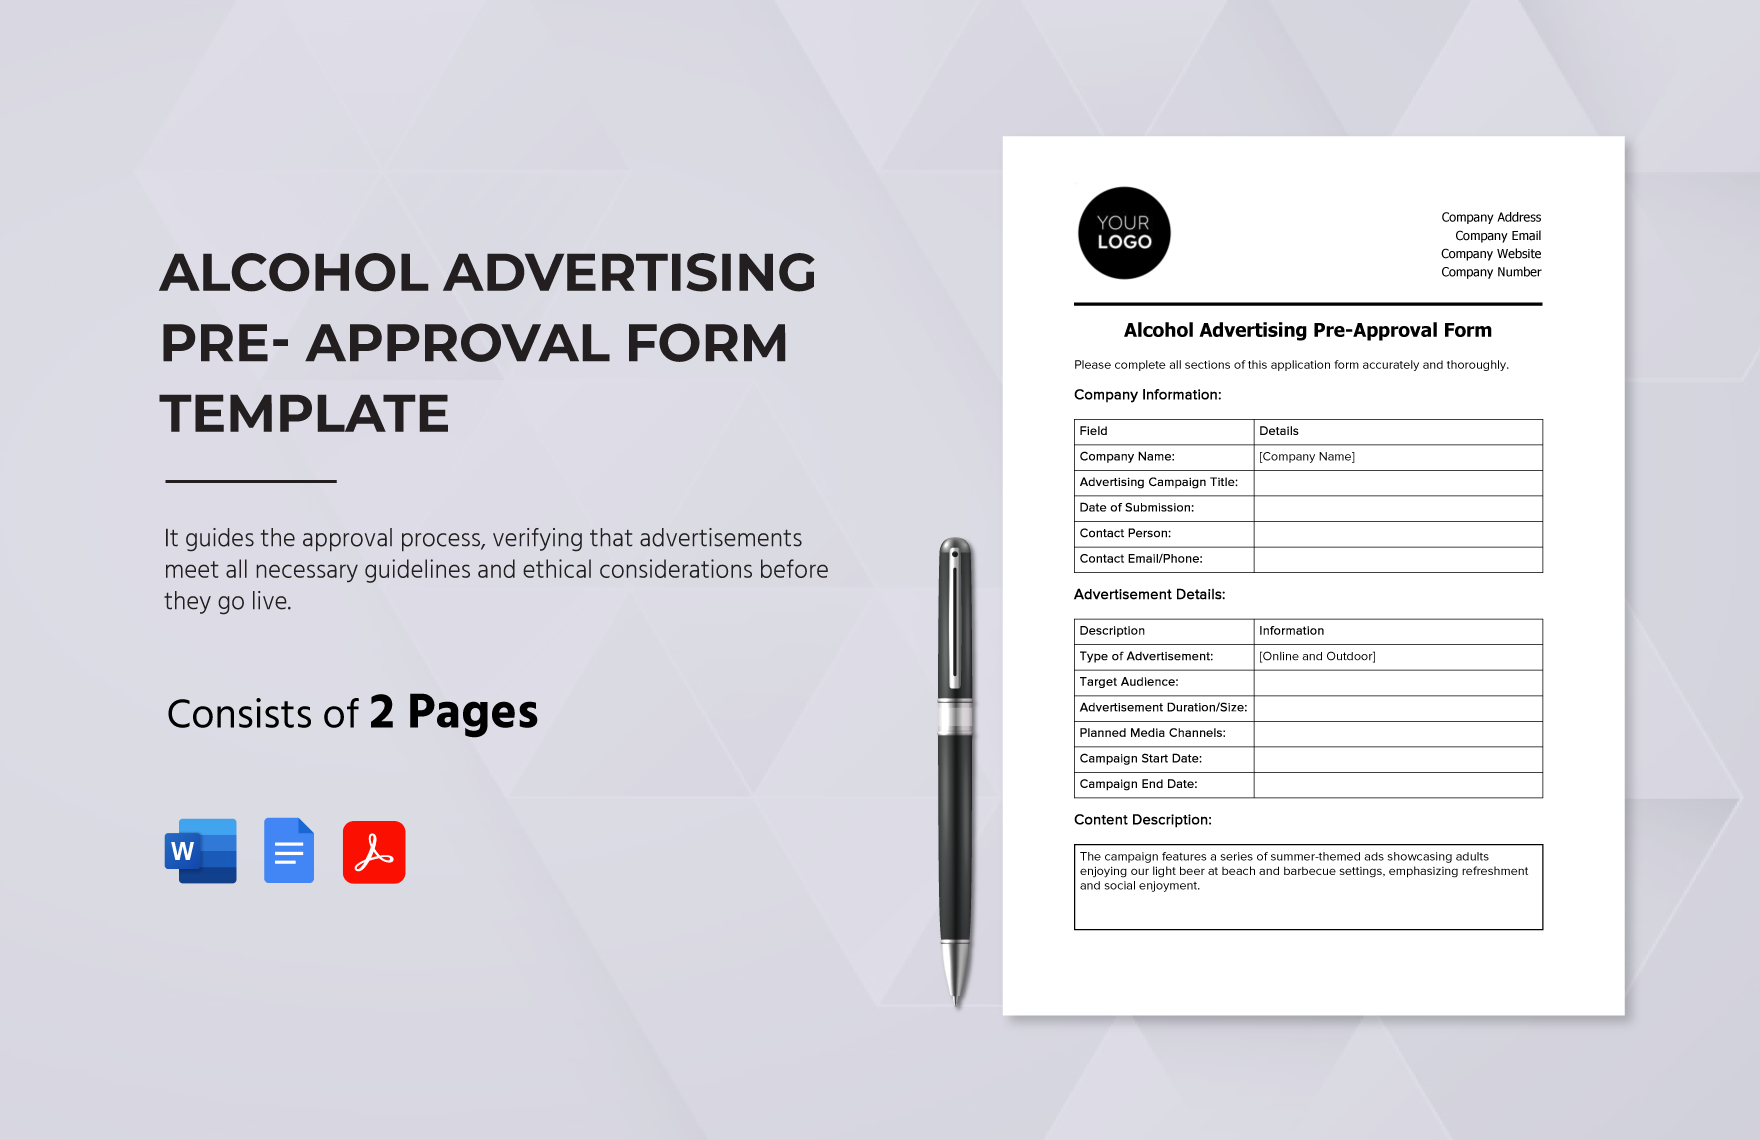 Alcohol Advertising Pre-Approval Form Template in Word, Google Docs, PDF